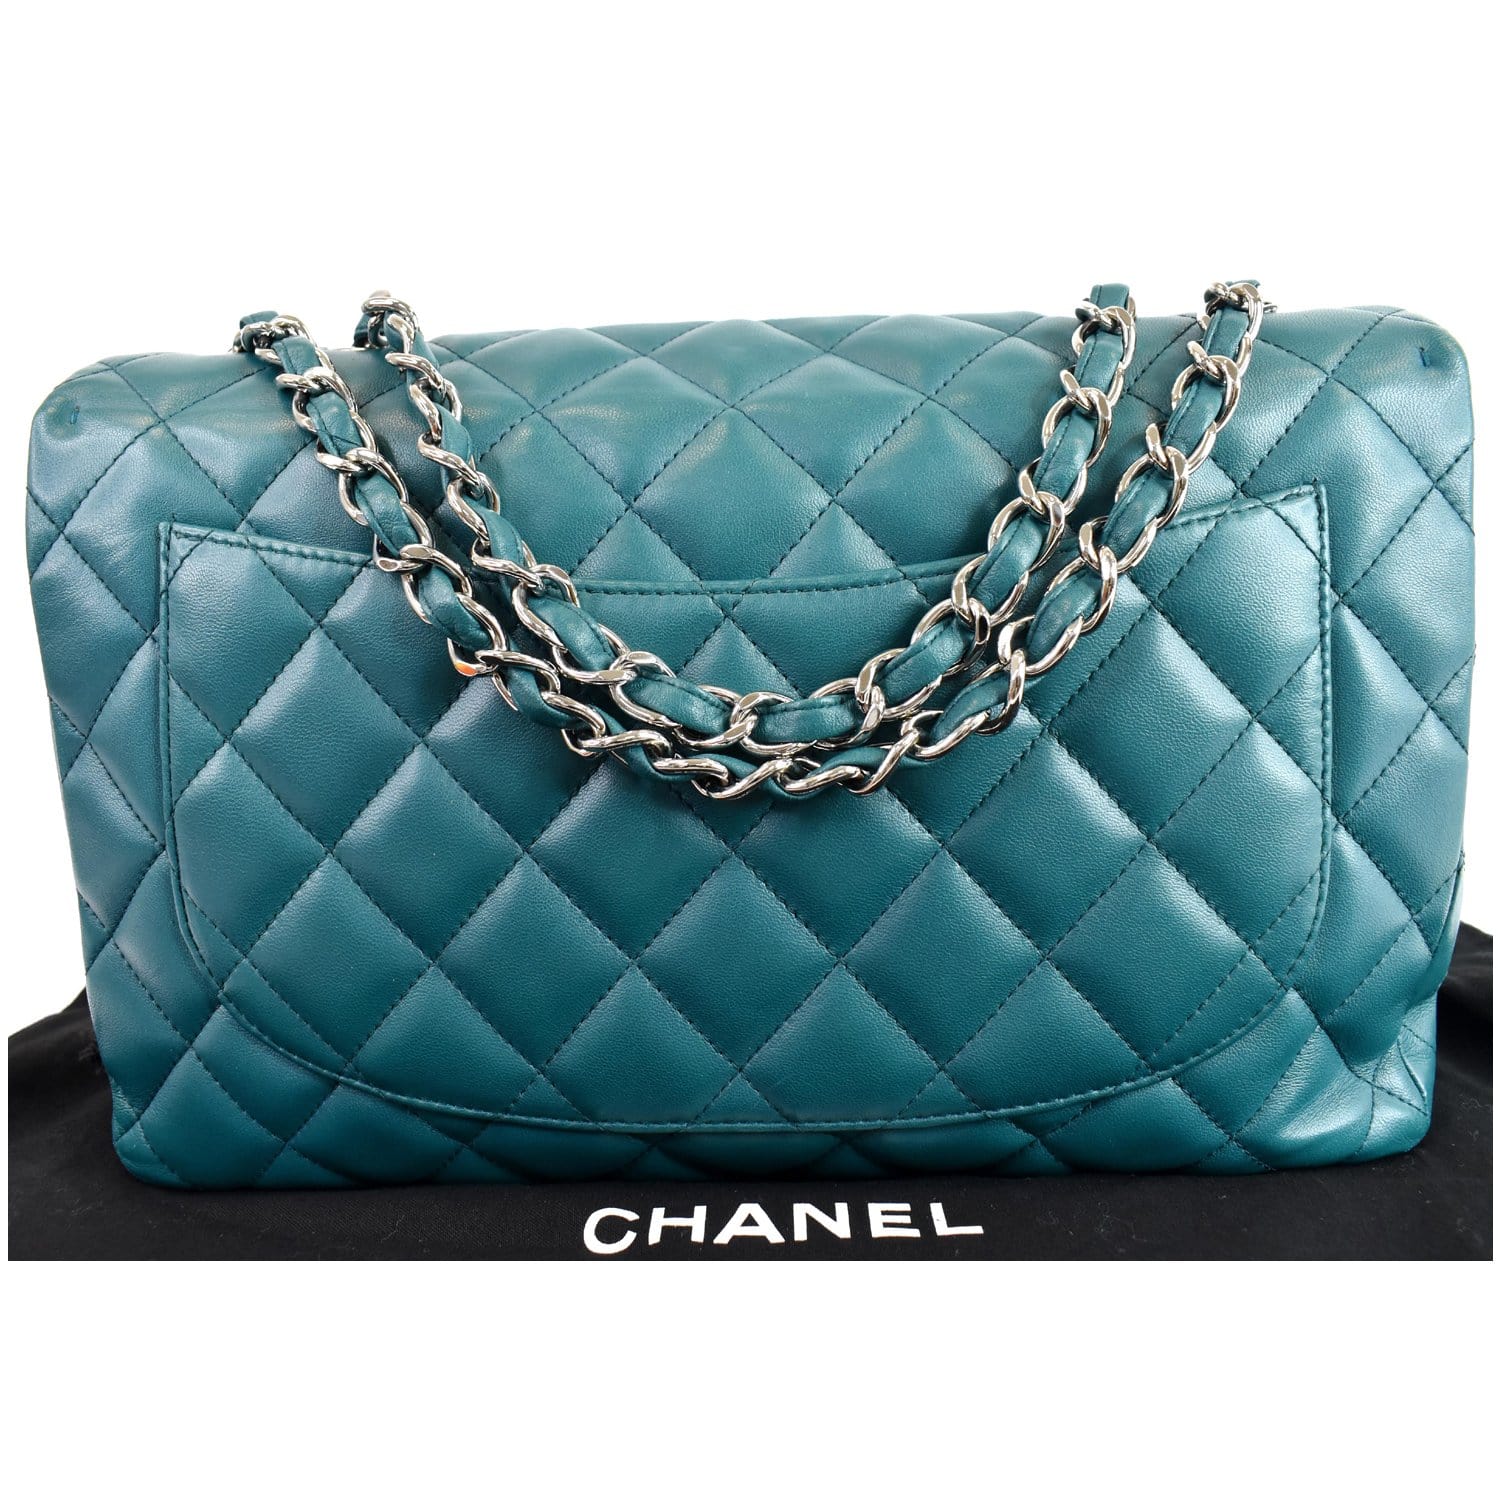 Chanel Turquoise Blue Matte Alligator Small Classic Flap Bag